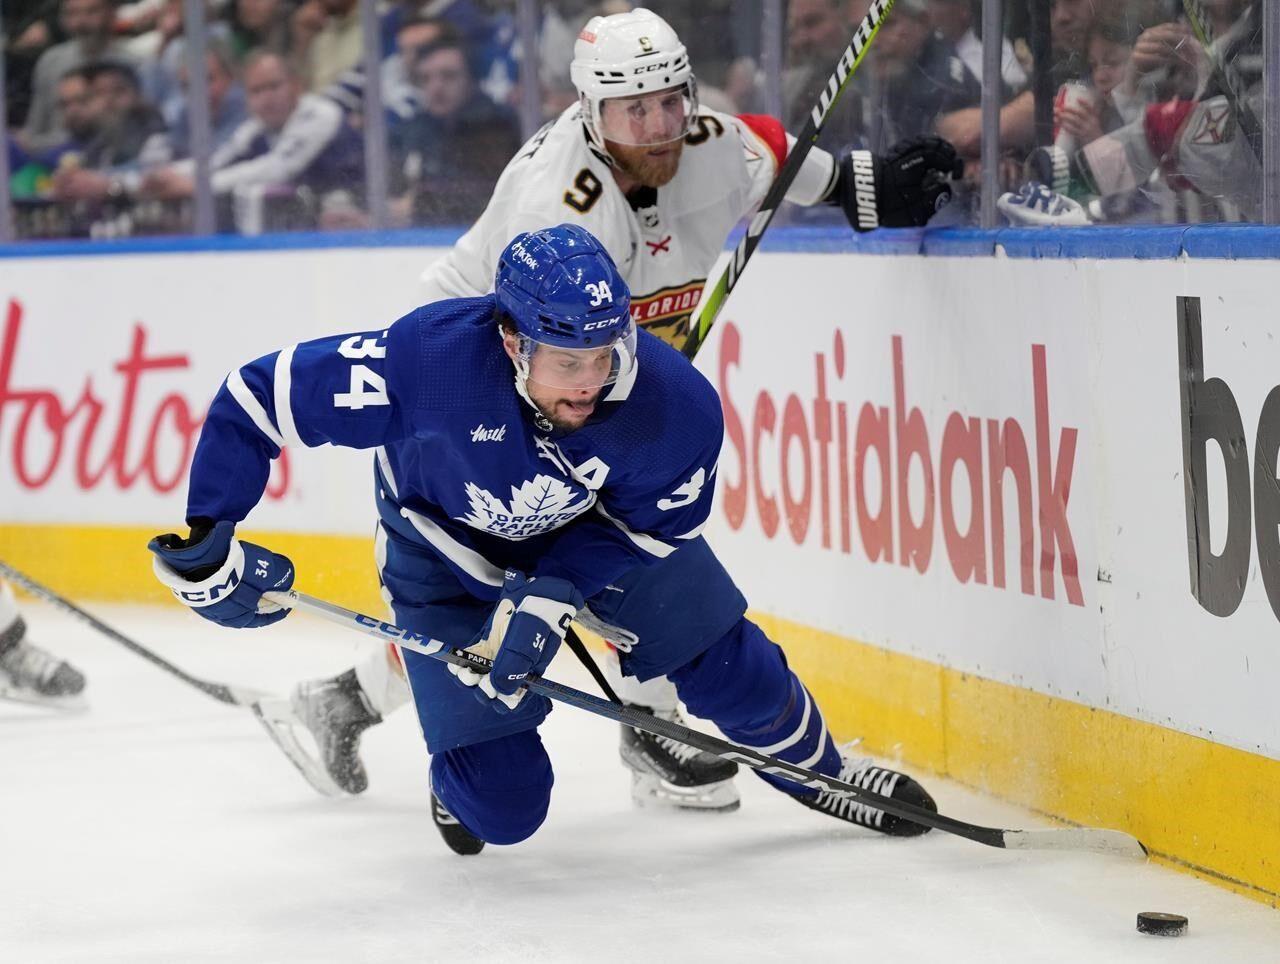 Leafs star Auston Matthews, charged with disorderly conduct and